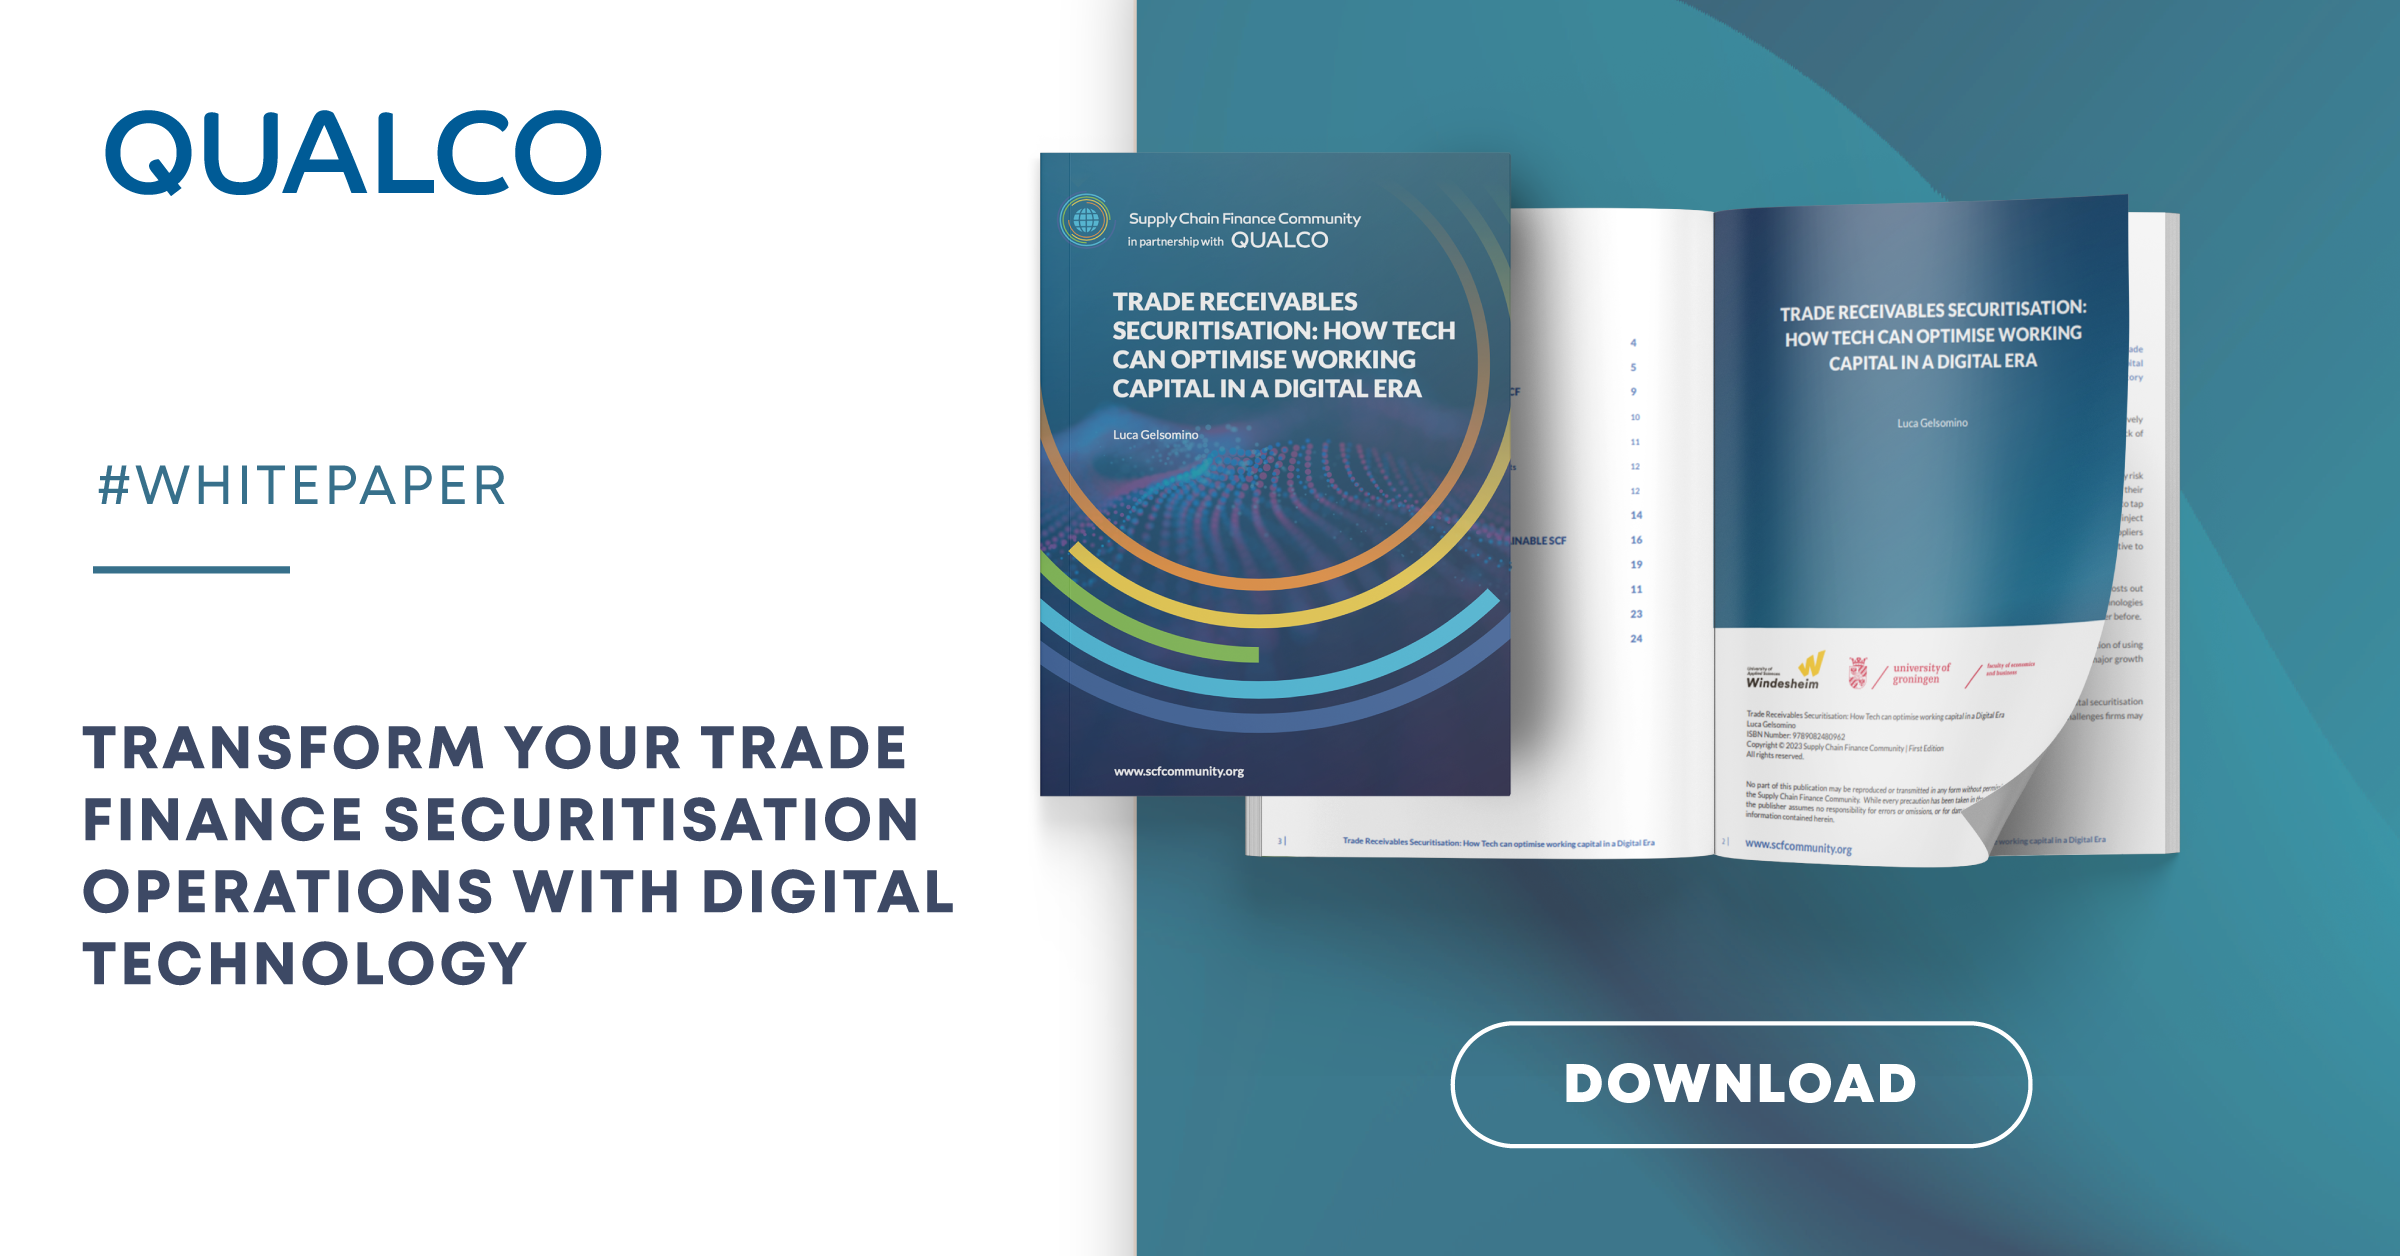 Whitepaper | Trade Receivables Securitisation How Tech can optimise working capital in a Digital Era_LinkedIn Ad (8)